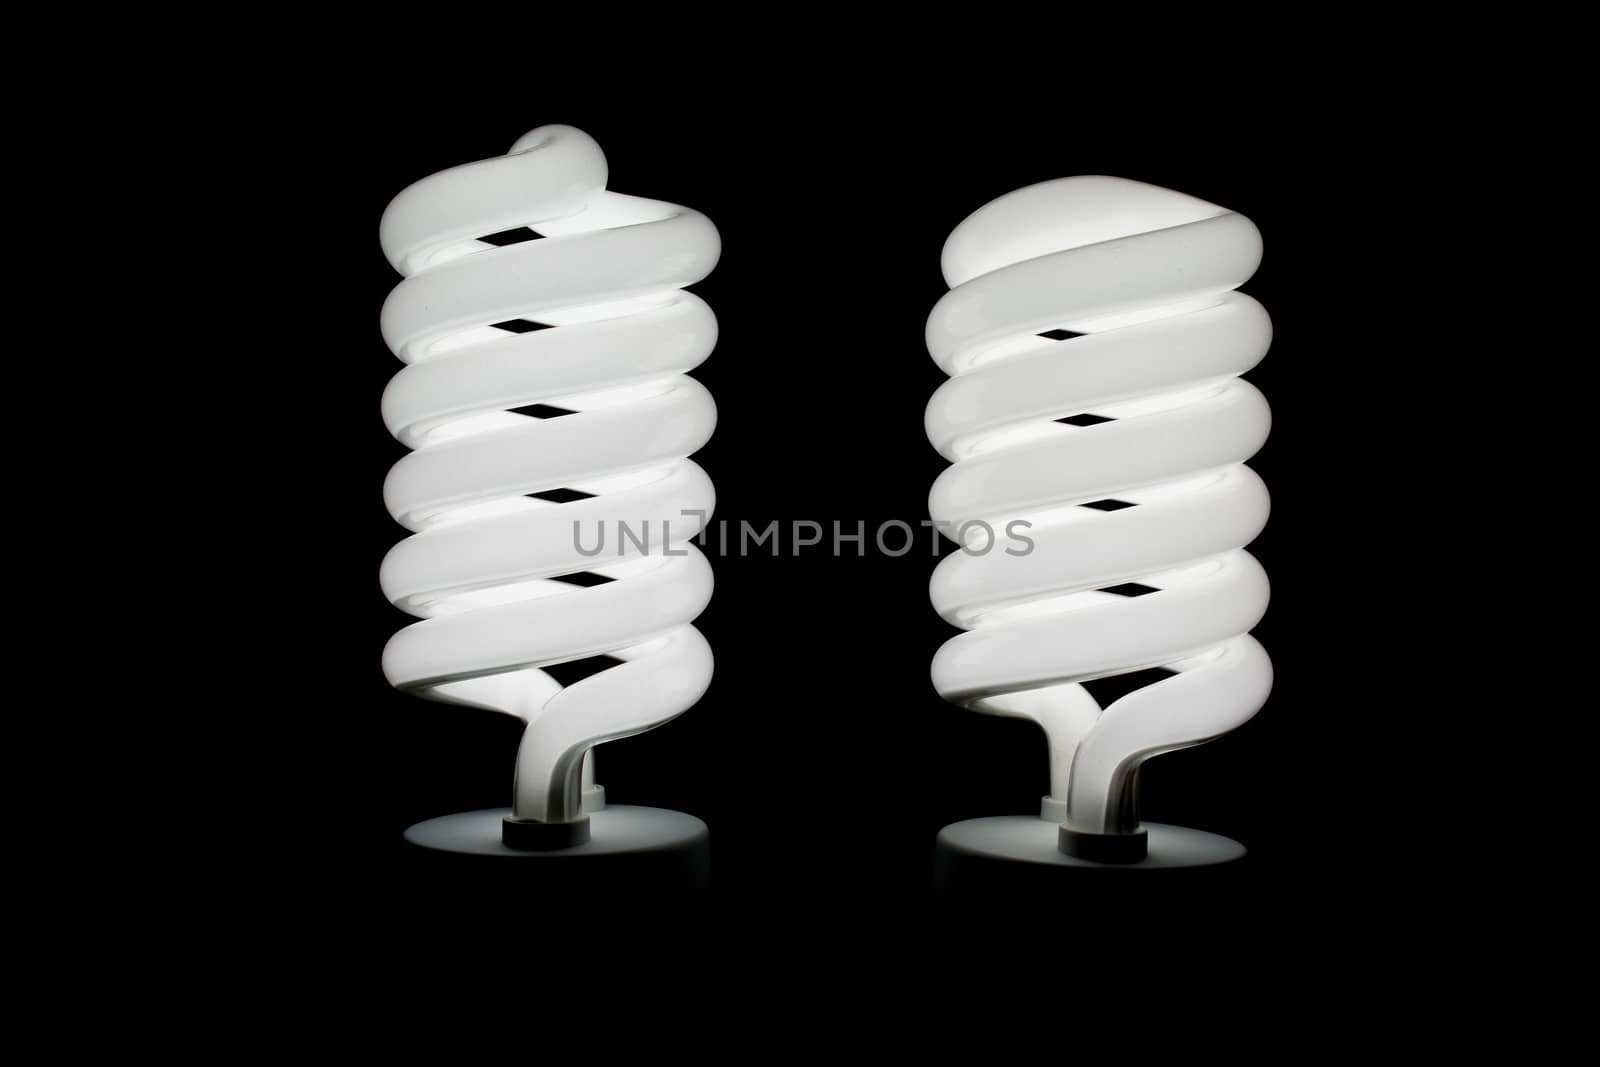 Two low energy spiral light bulbs illuminated